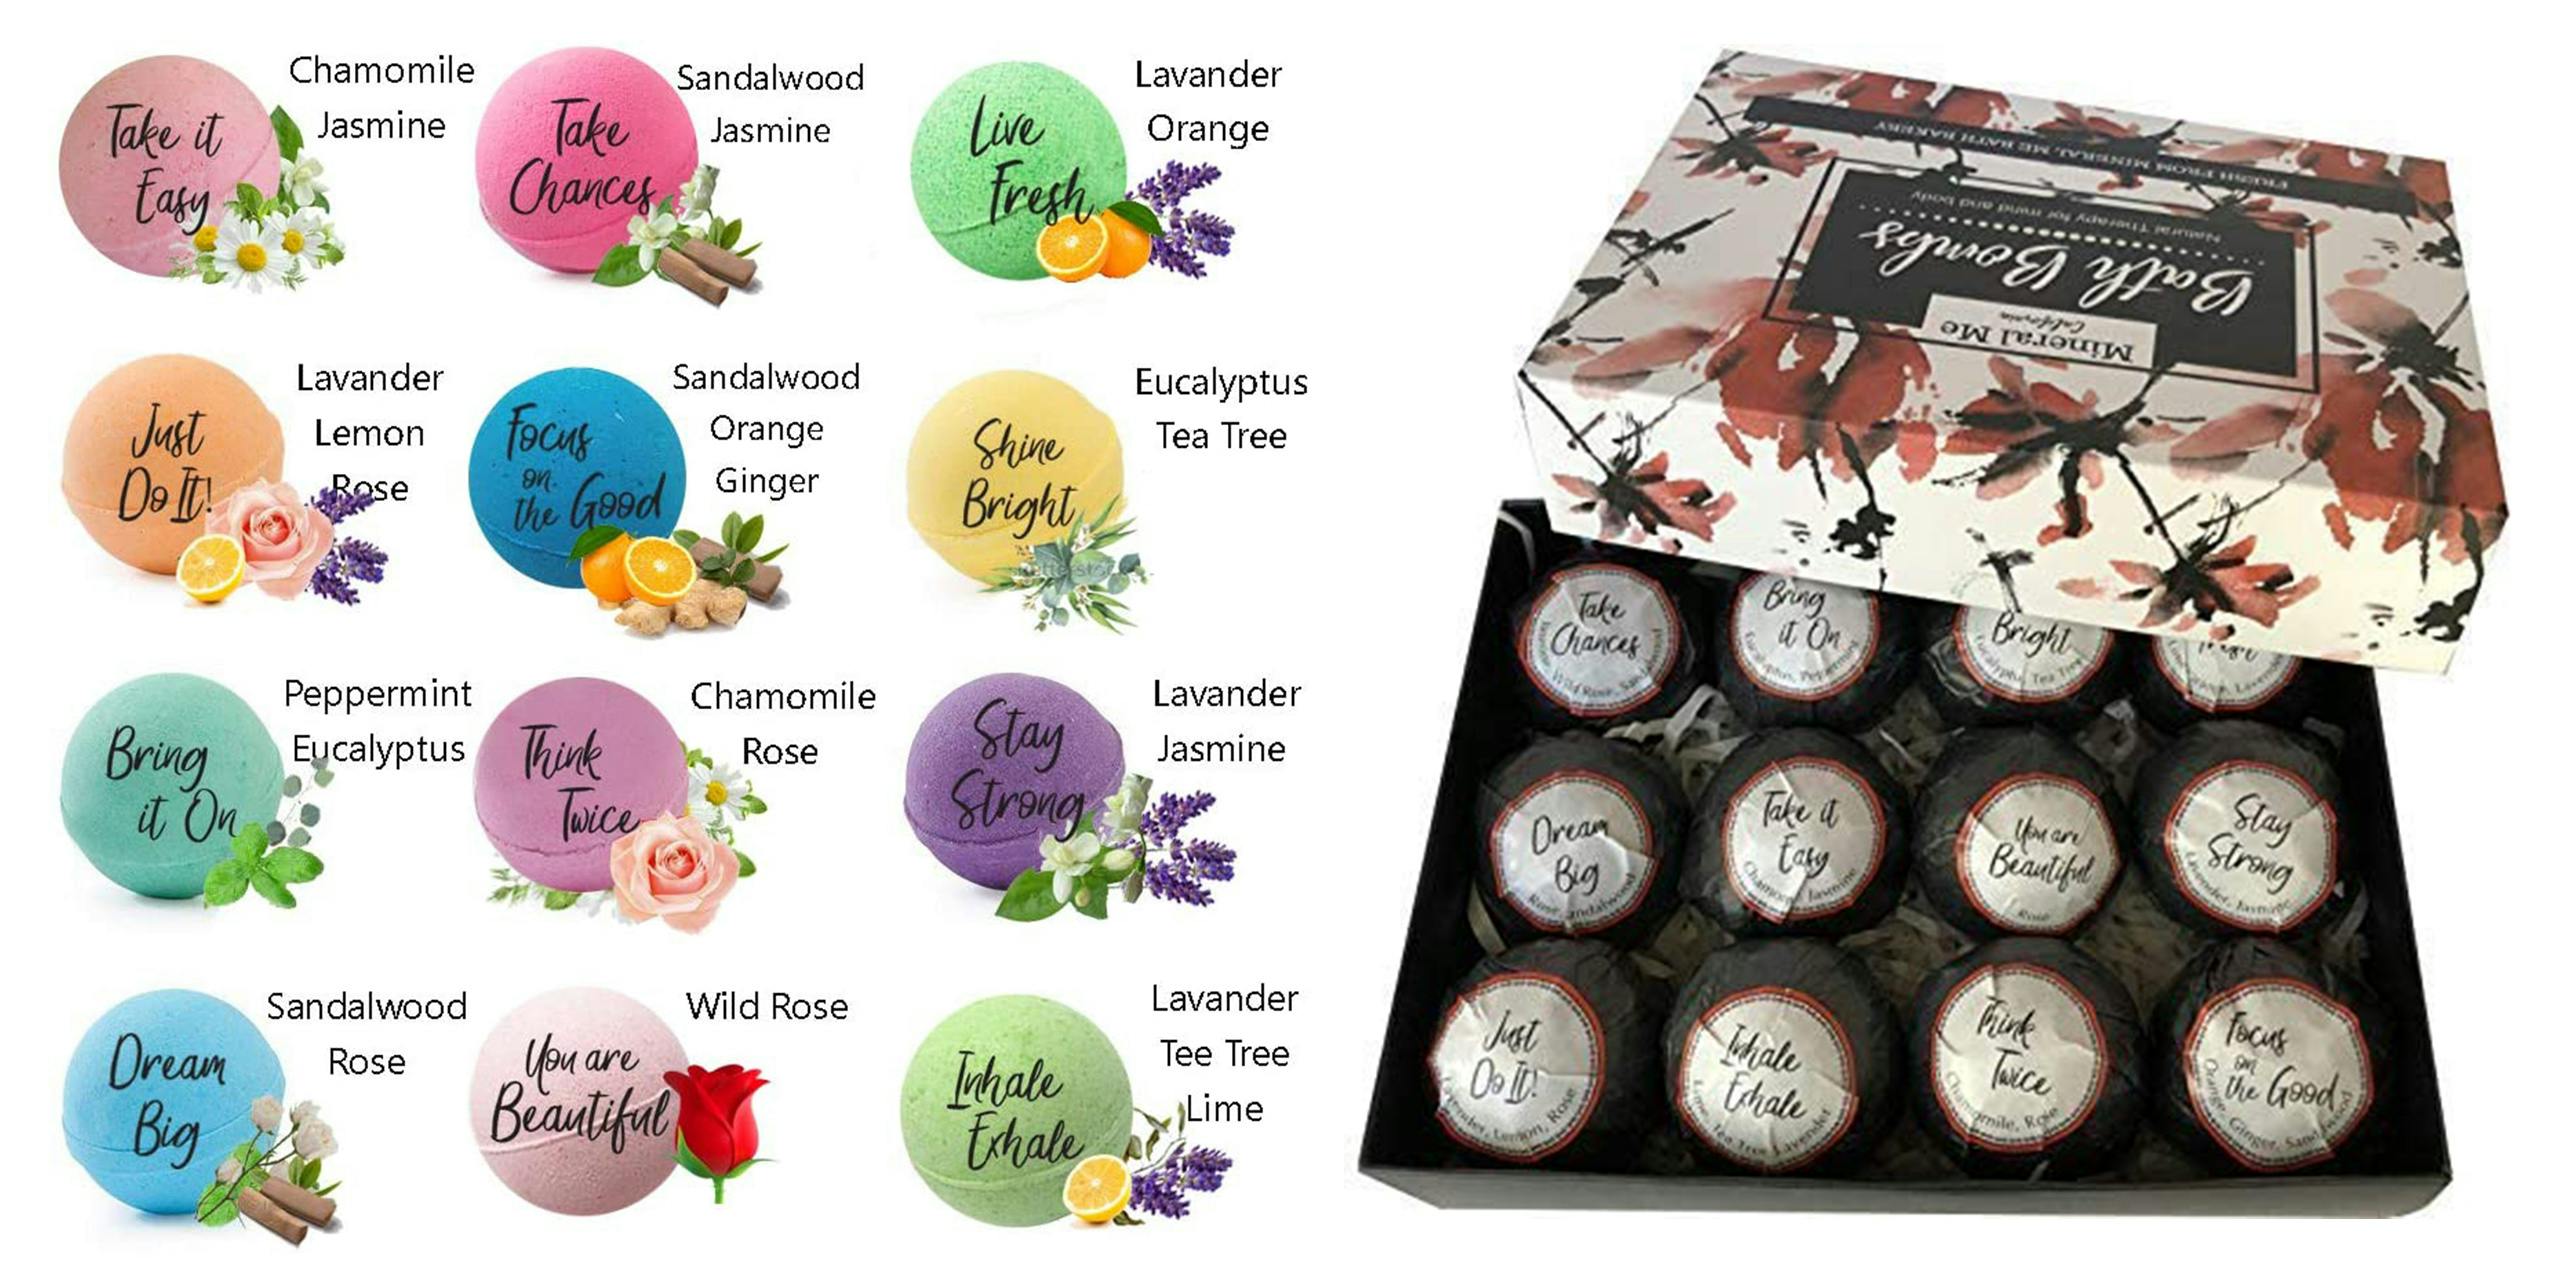 A selection of inspirational bath bombs that will make a great self-care gift.